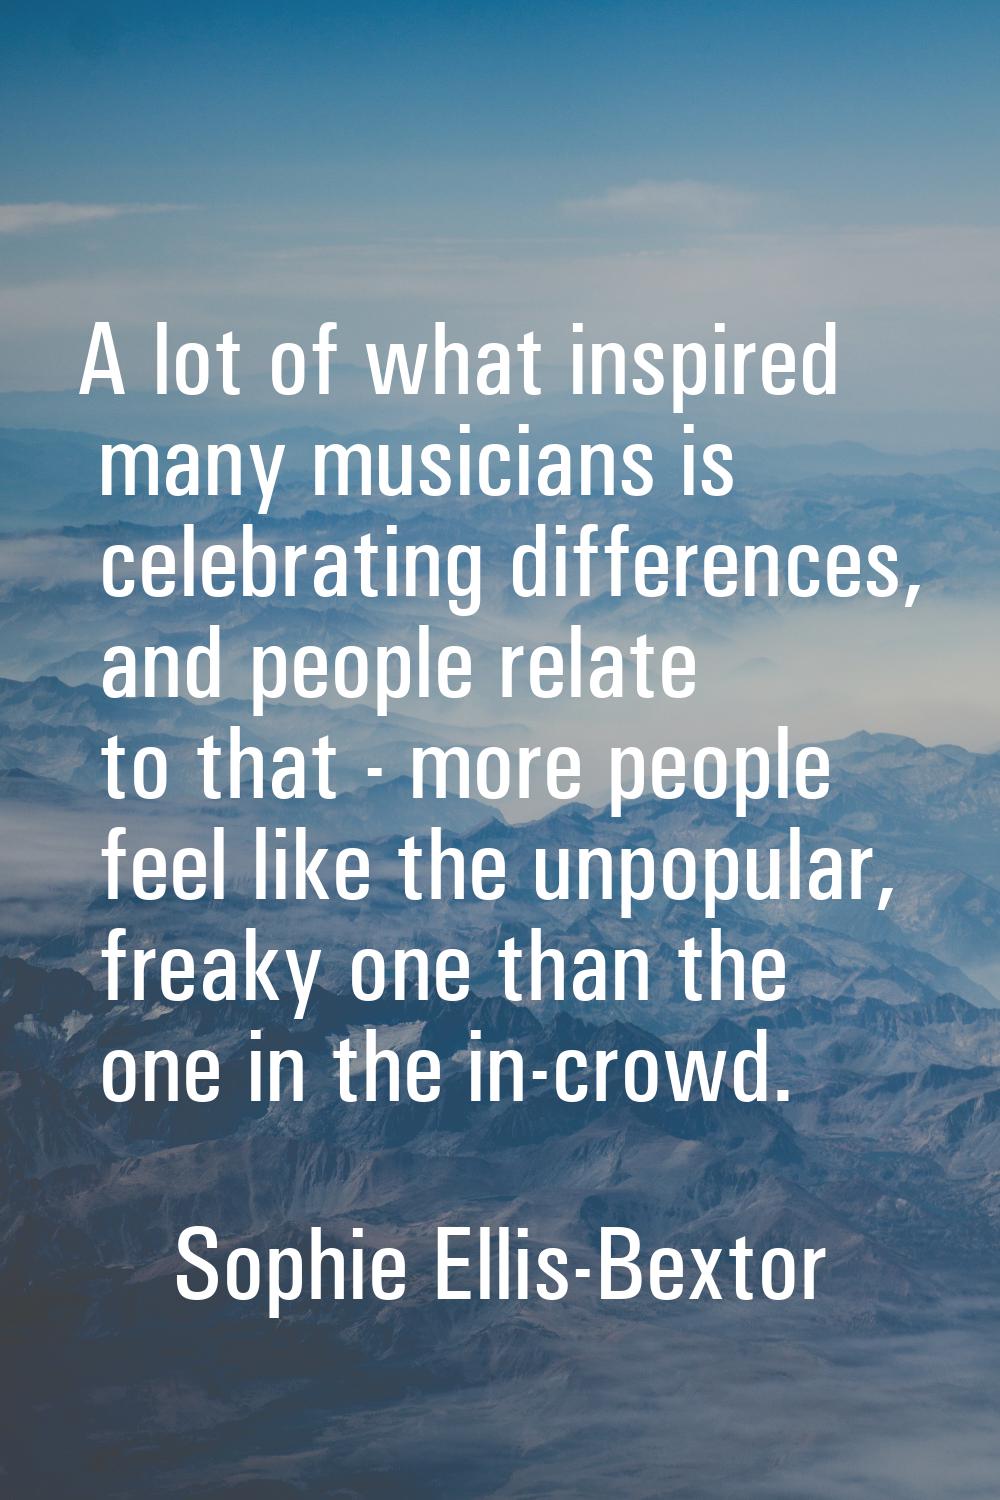 A lot of what inspired many musicians is celebrating differences, and people relate to that - more 